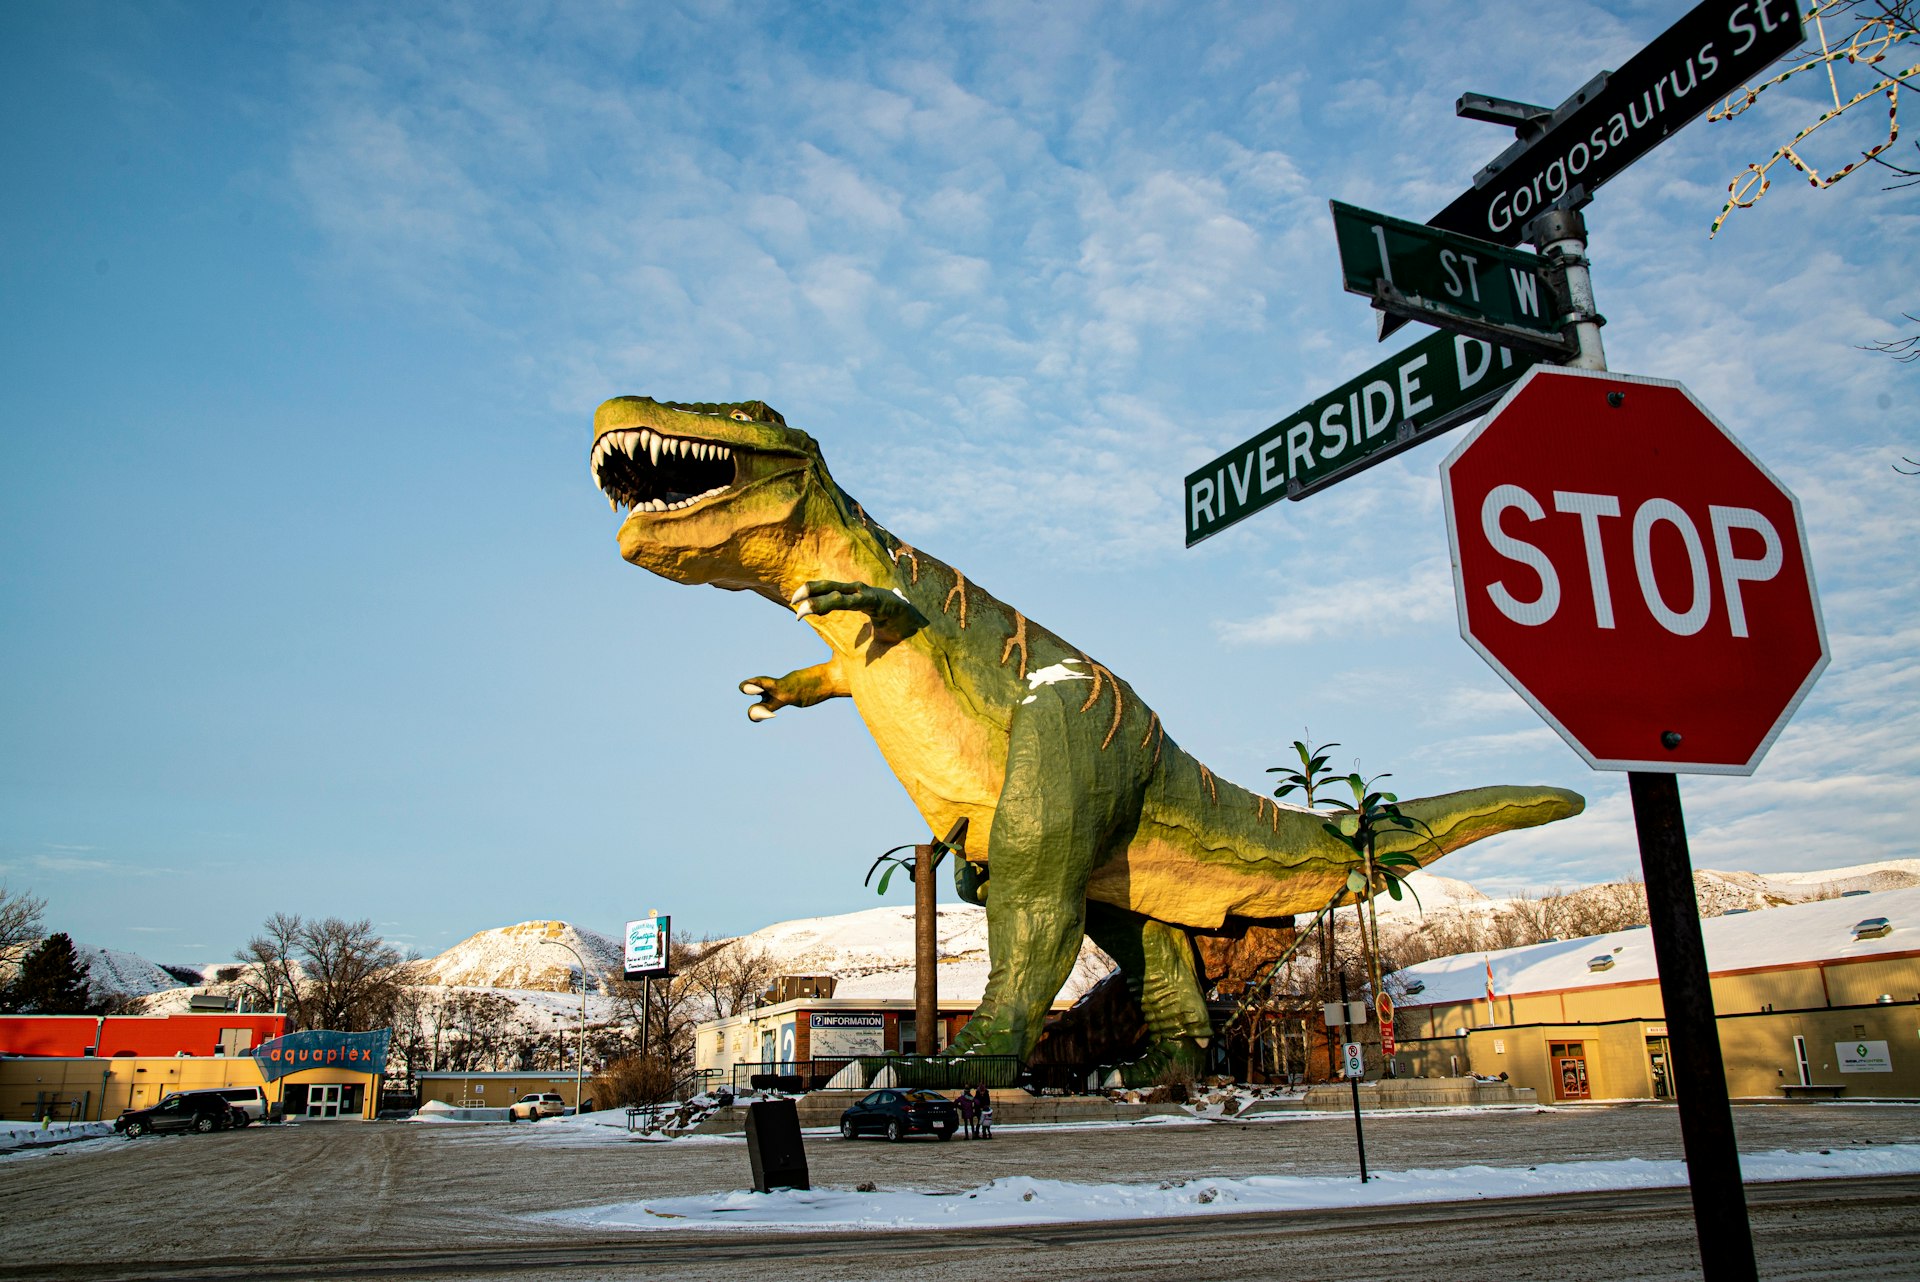 A huge Tyrannosaurus rex statue at an intersection in downtown Drumheller, Alberta, Canada